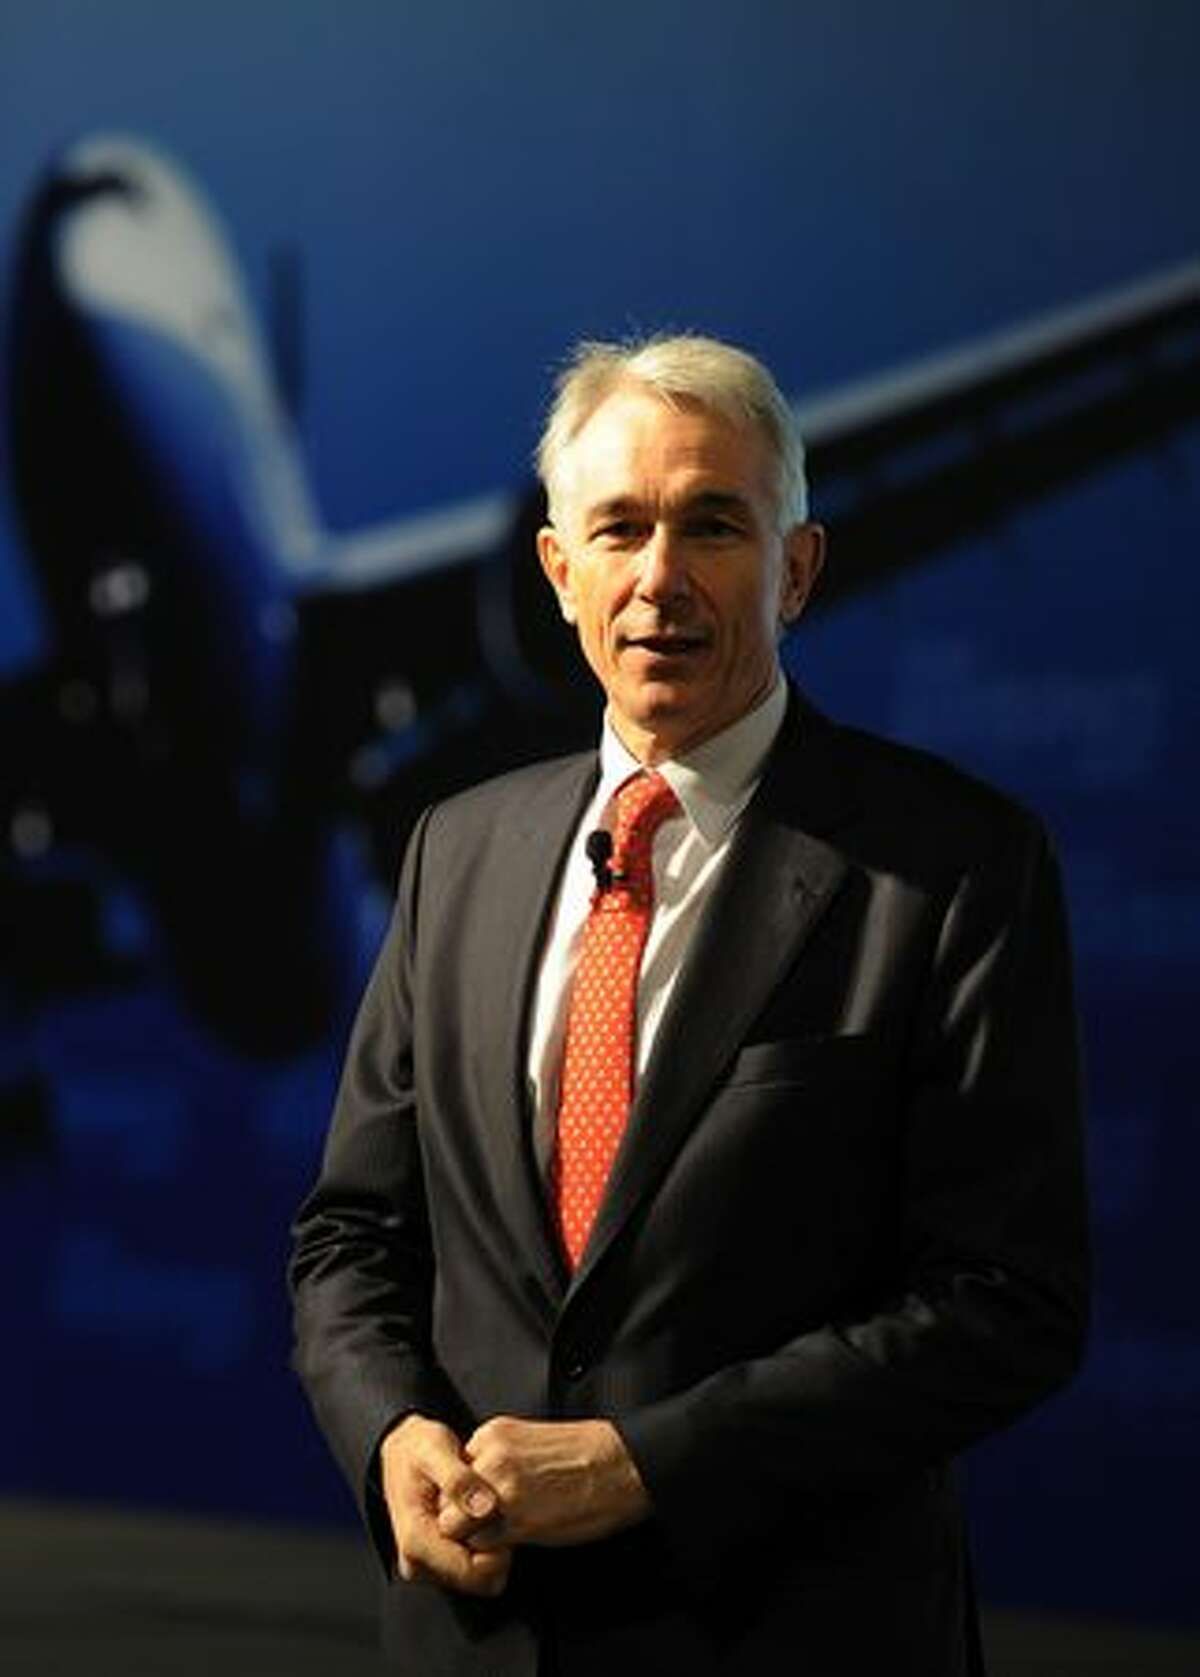 Tony Tyler, chief executive of Cathay Pacific, speaks at a seminar on the sidelines of the Asian Aerospace exhibition in Hong Kong.